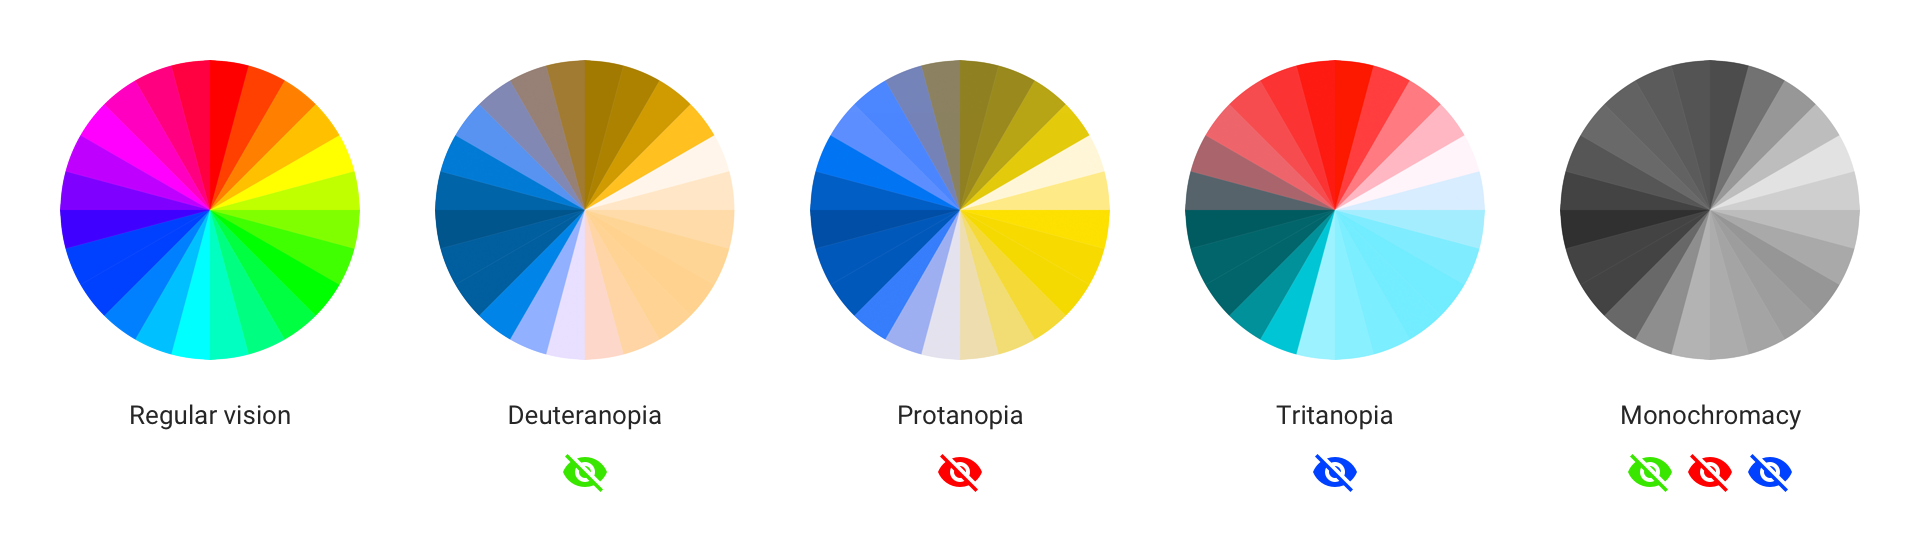 Color wheel highlighting complementary colors for regular vision, deuteranopia, protanopia, tritanopia and monochromacy